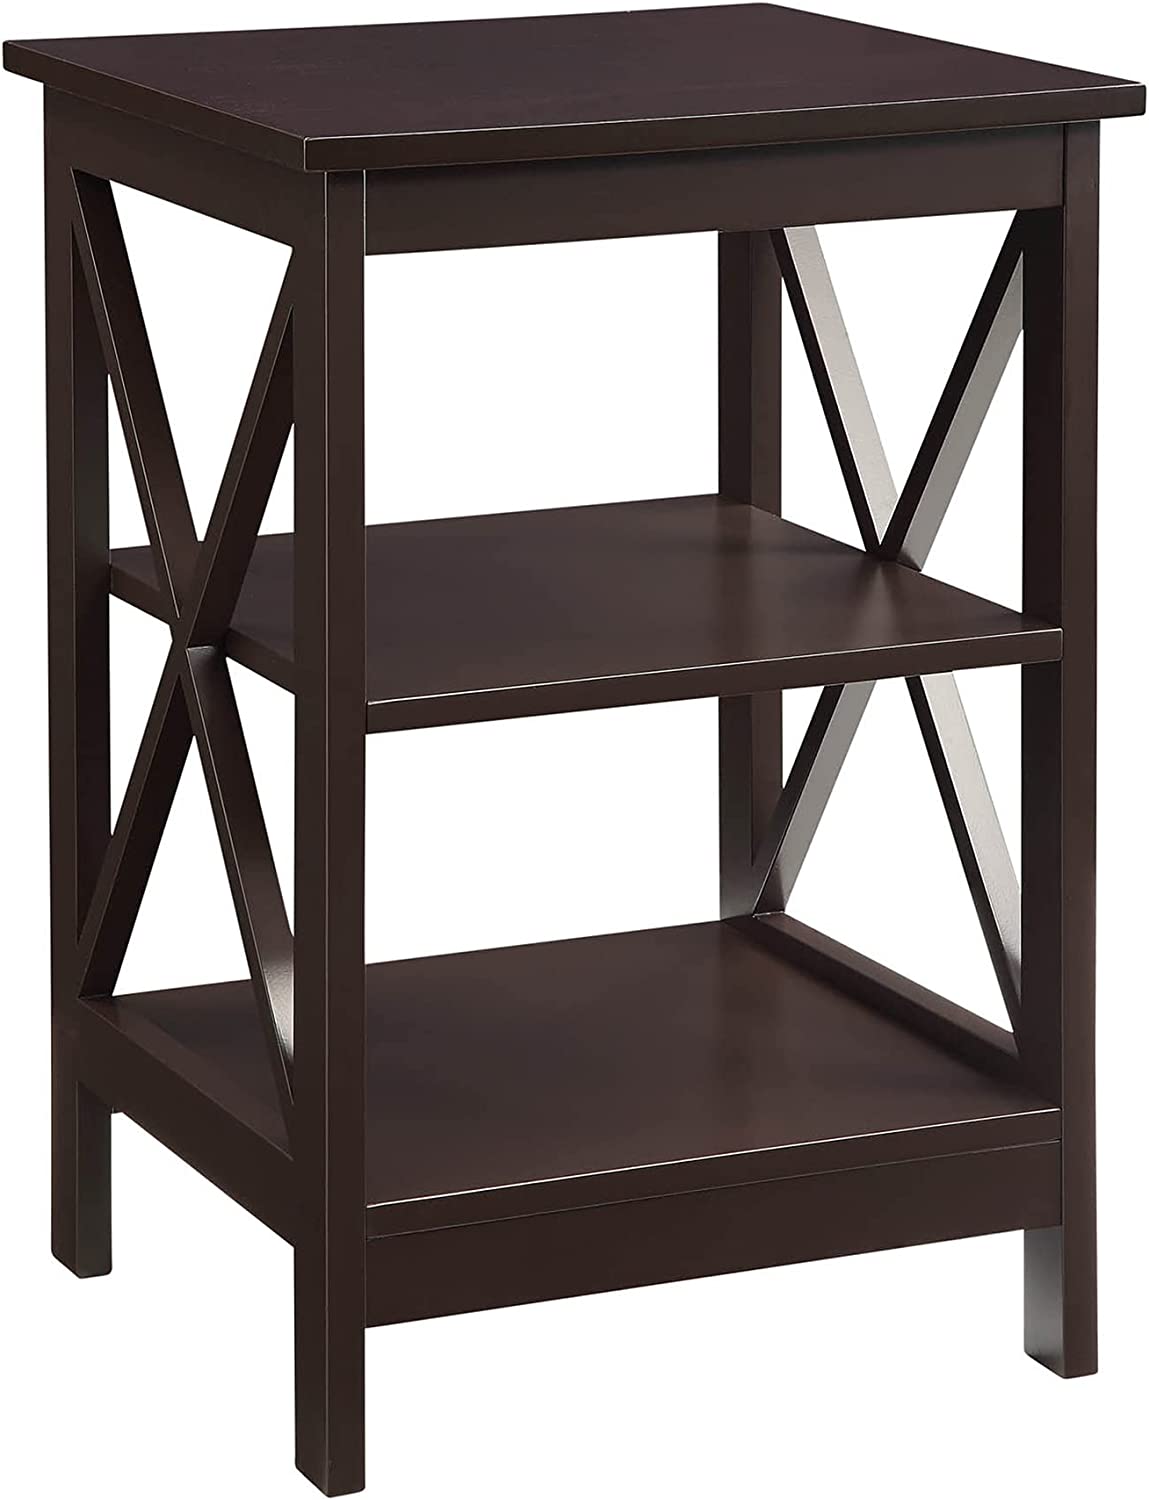 Convenience Concepts Oxford Non-Lead Living Room End Table